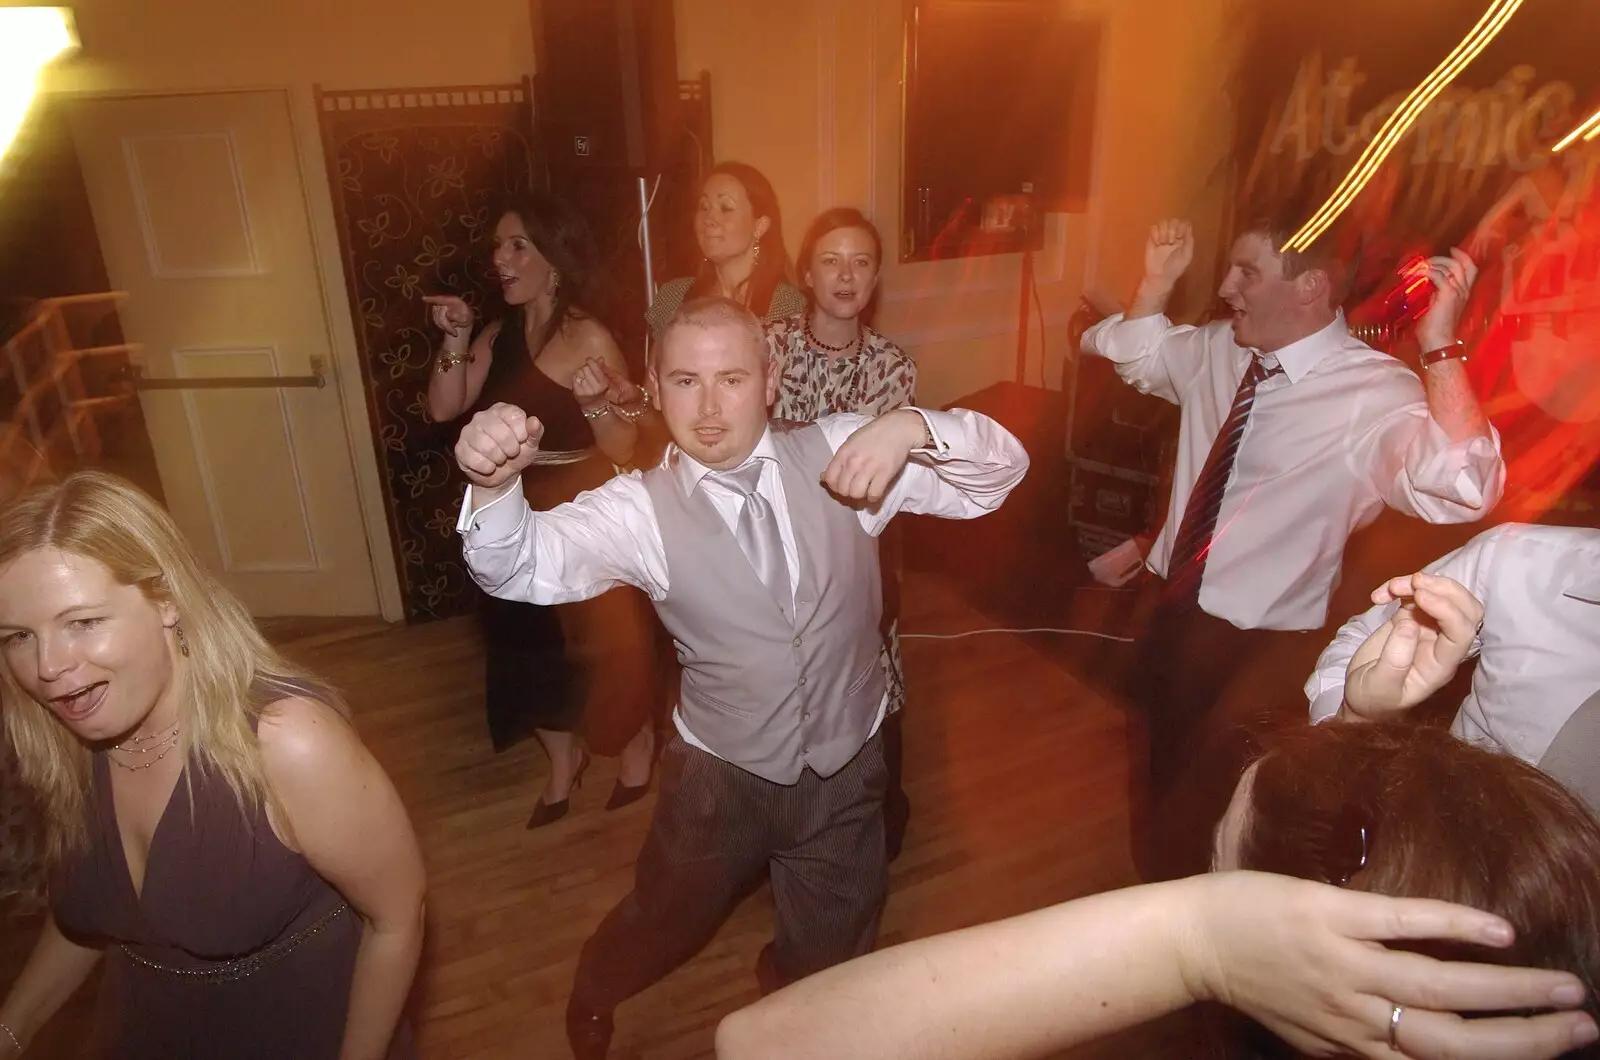 James gets down, from Paul and Jenny's Wedding, Tralee, County Kerry, Ireland - 3rd May 2008